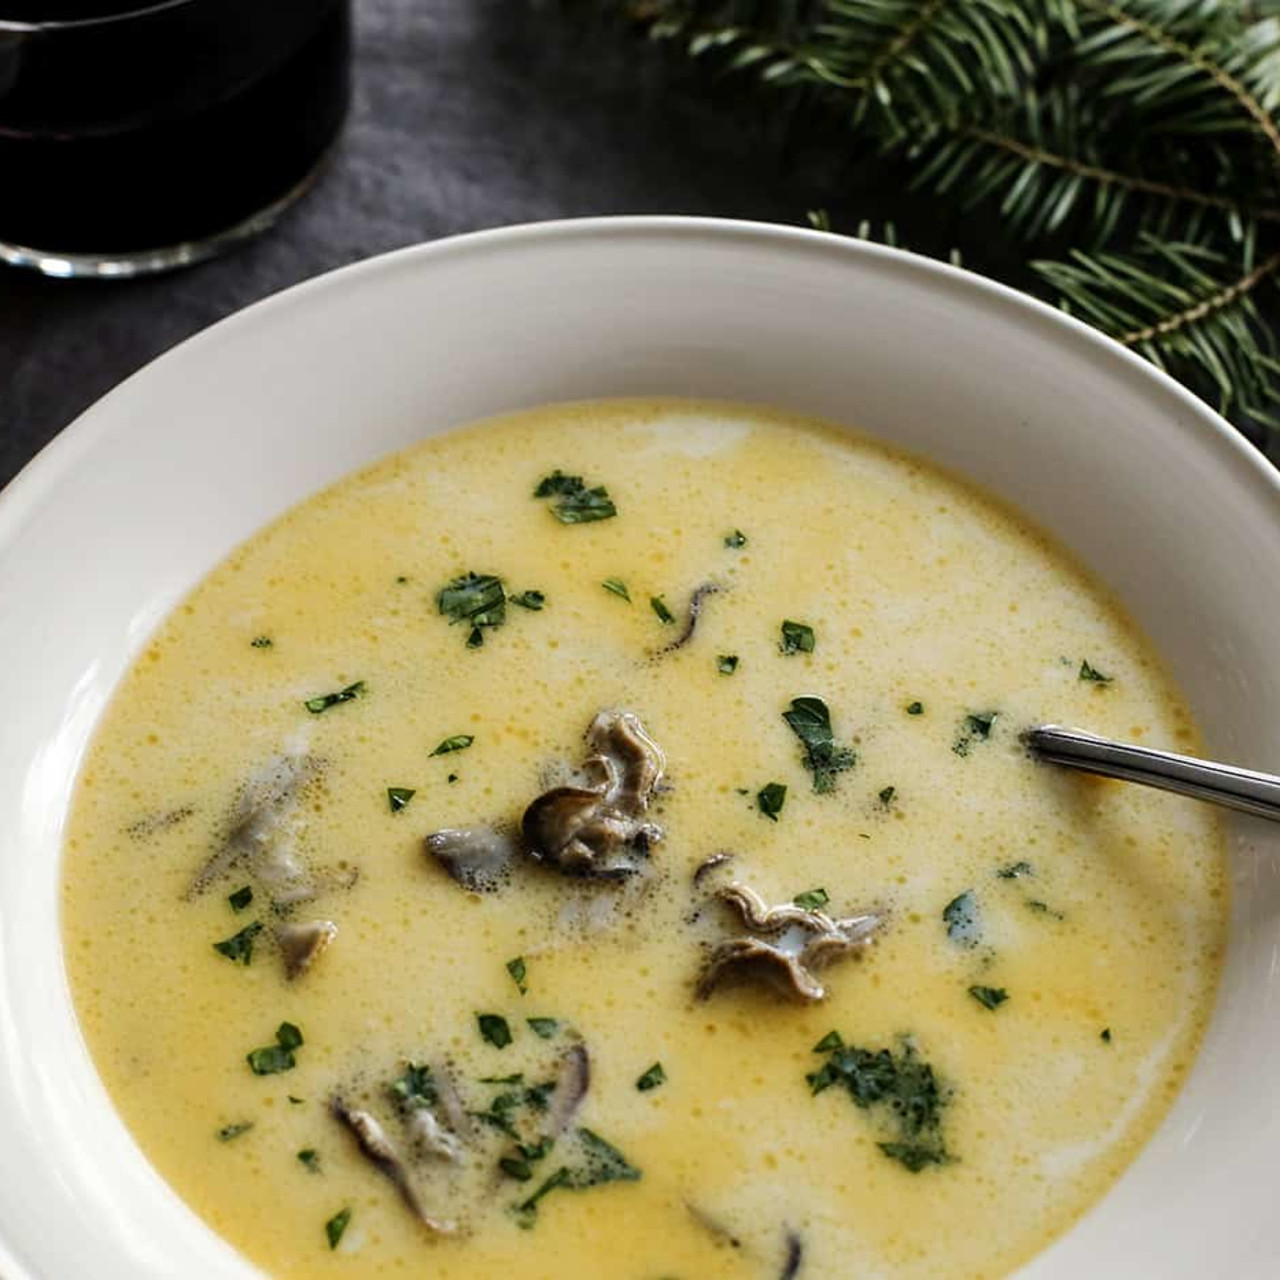 https://bigoven-res.cloudinary.com/image/upload/t_recipe-1280/oyster-stew-a6bfd3.jpg